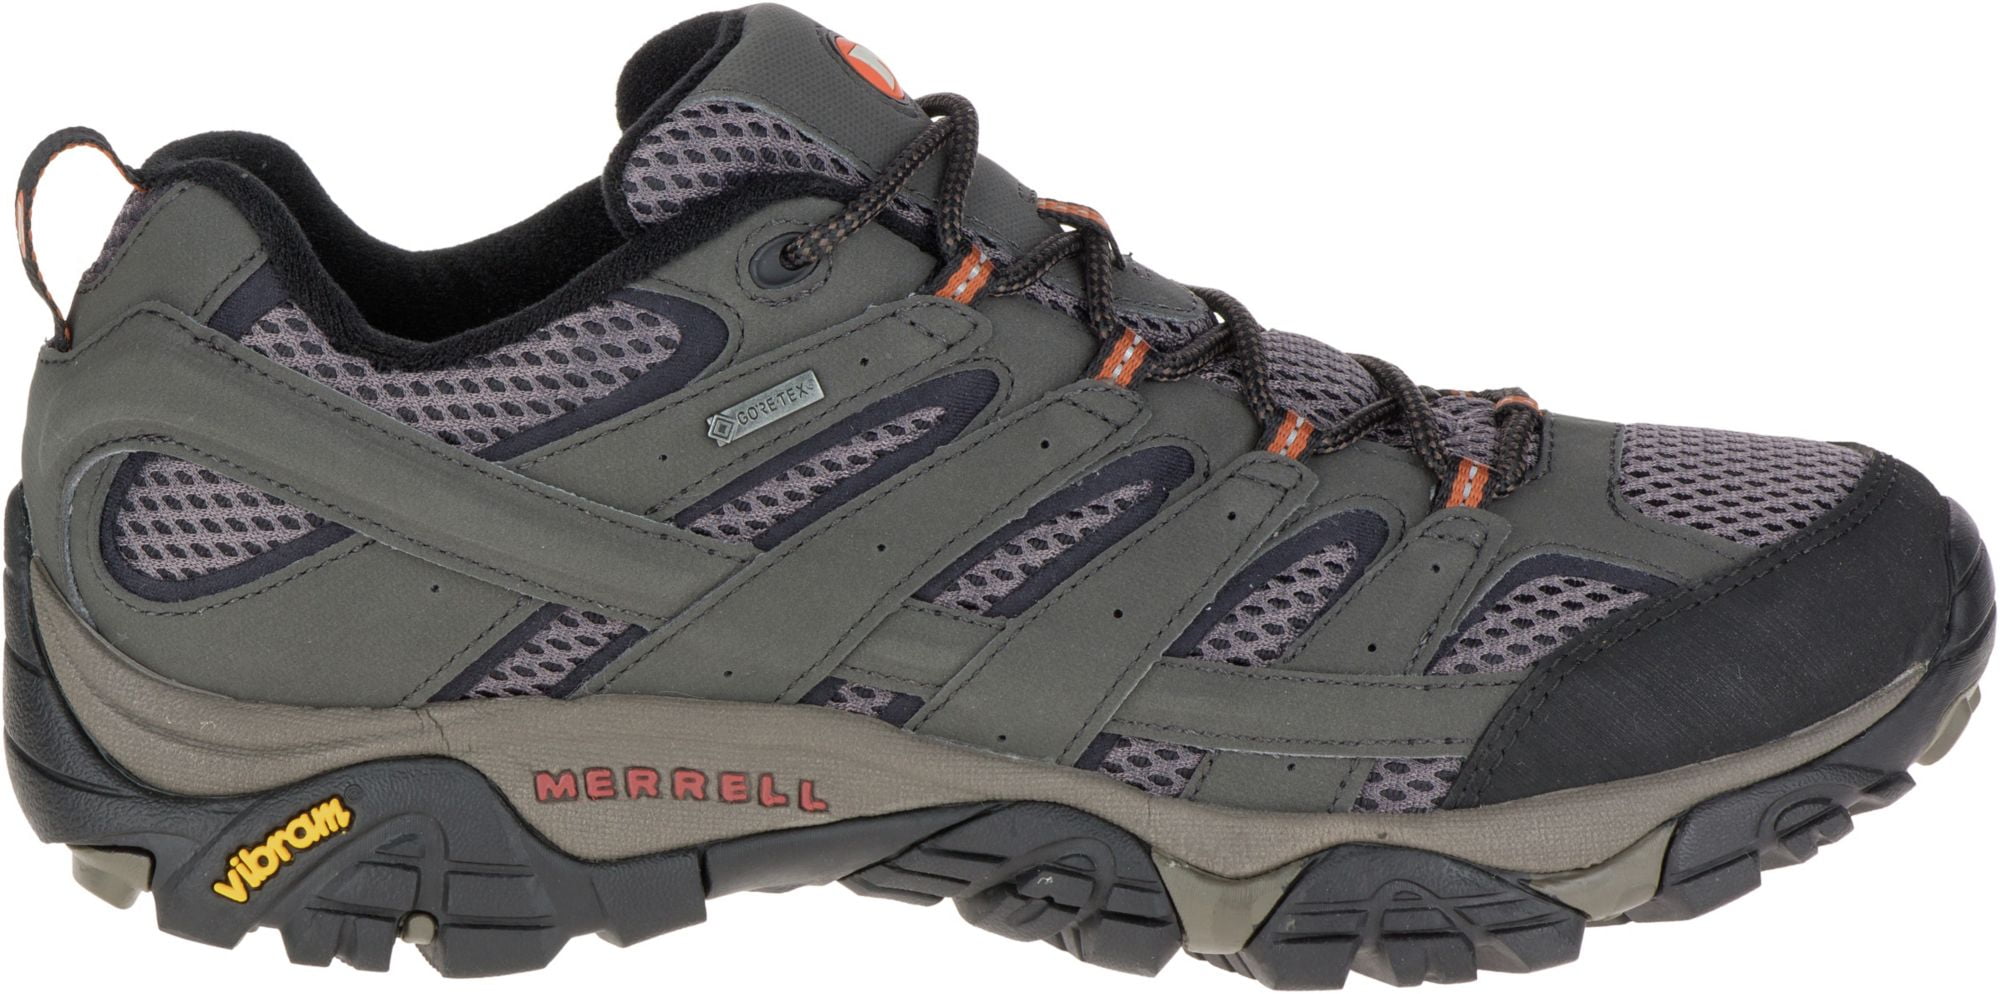 Merrell ladies hiking/outdoor low ankle shoes grey mix sise 5 Goretex Vibram 